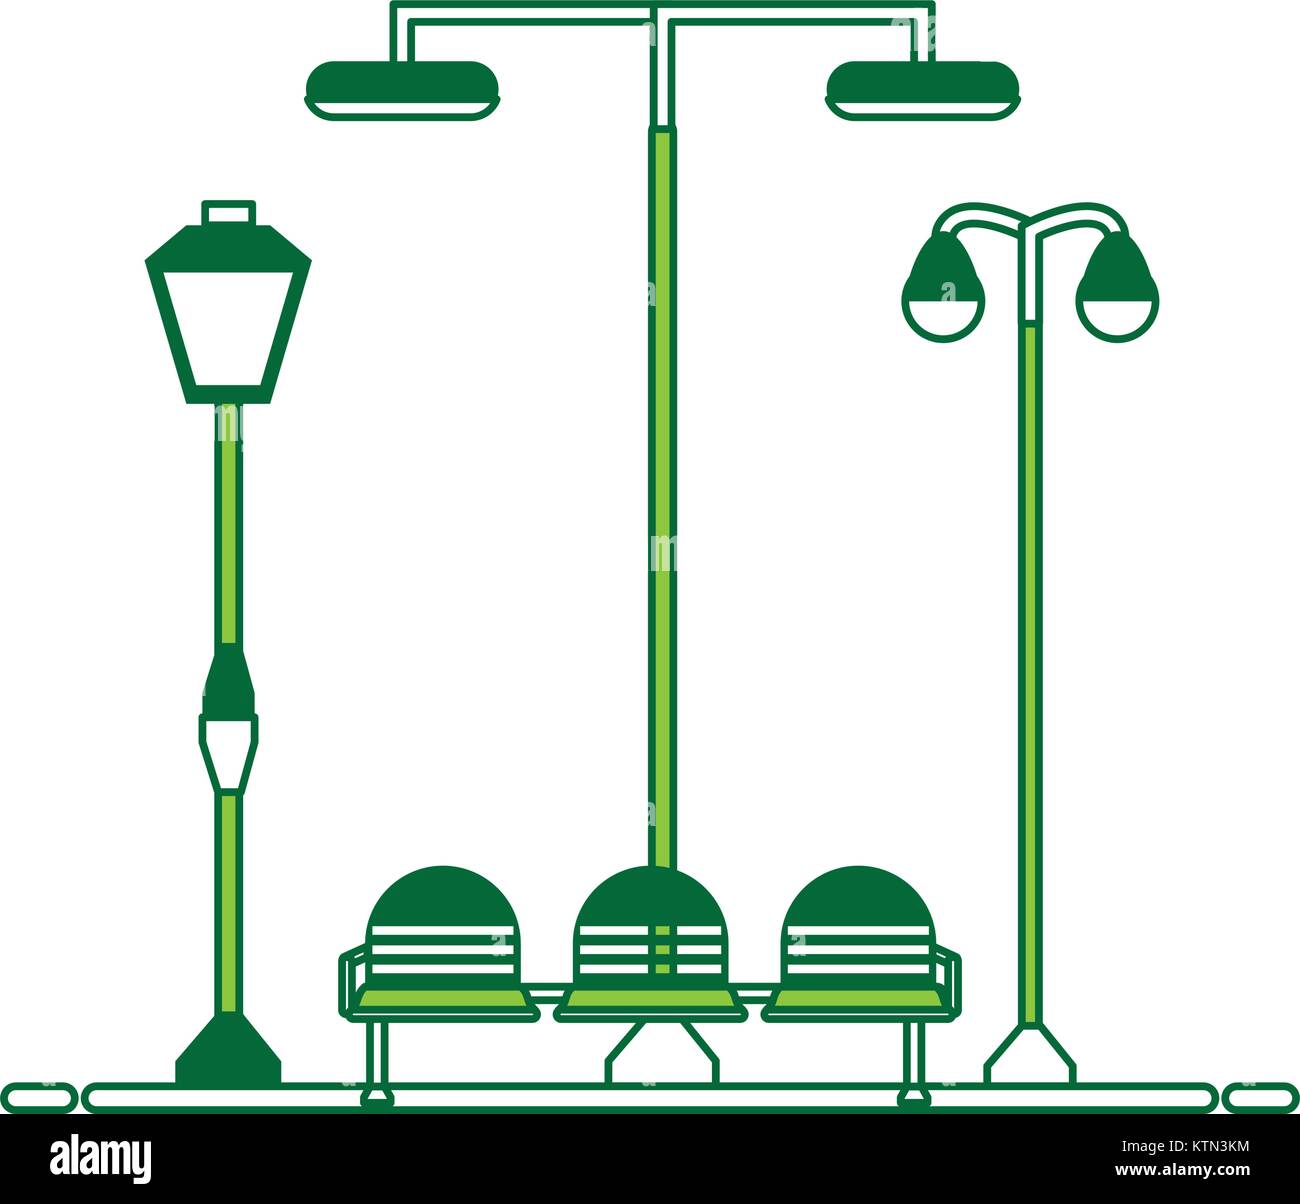 Ornate street lamps Stock Vector Images - Alamy